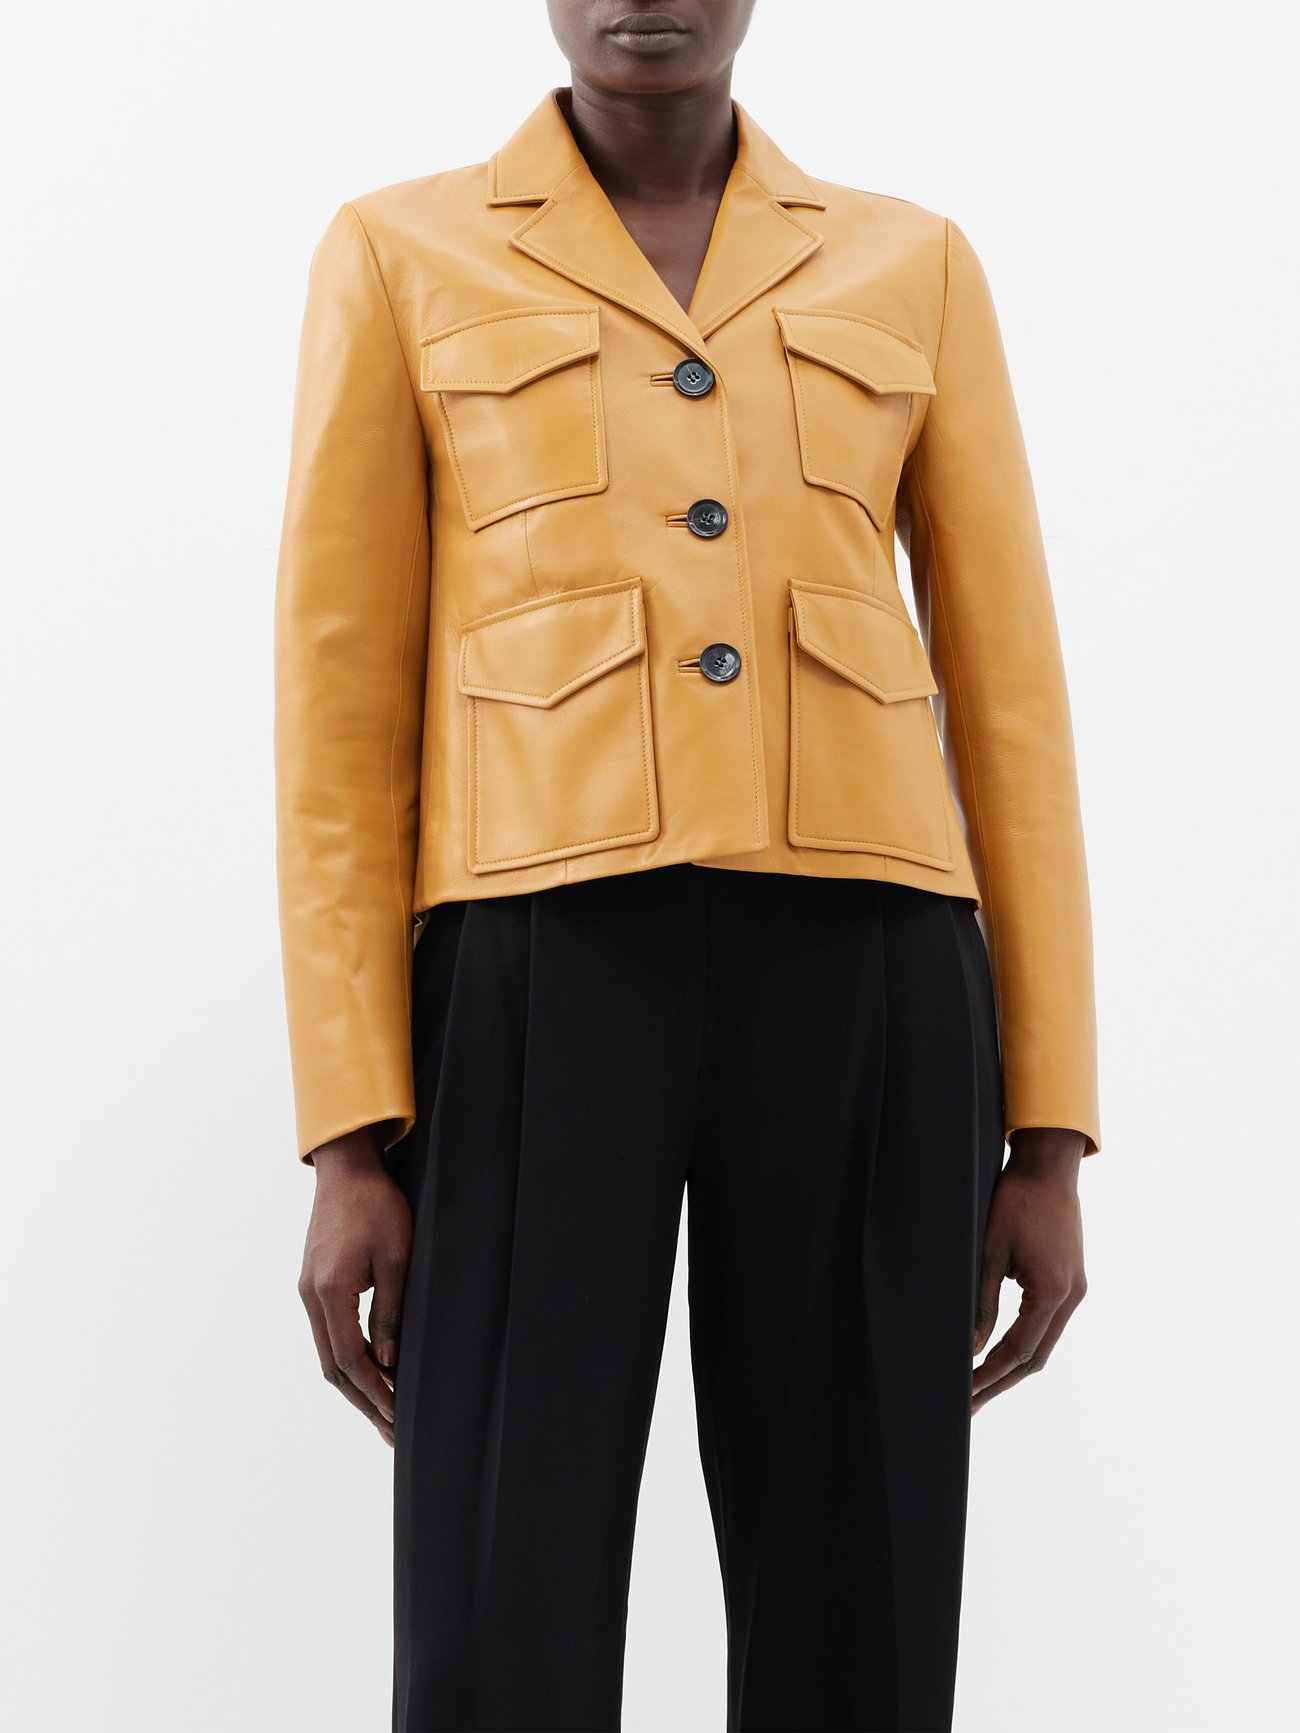 leather Yellow Patch-pocket Schouler | MATCHES Proenza jacket UK |